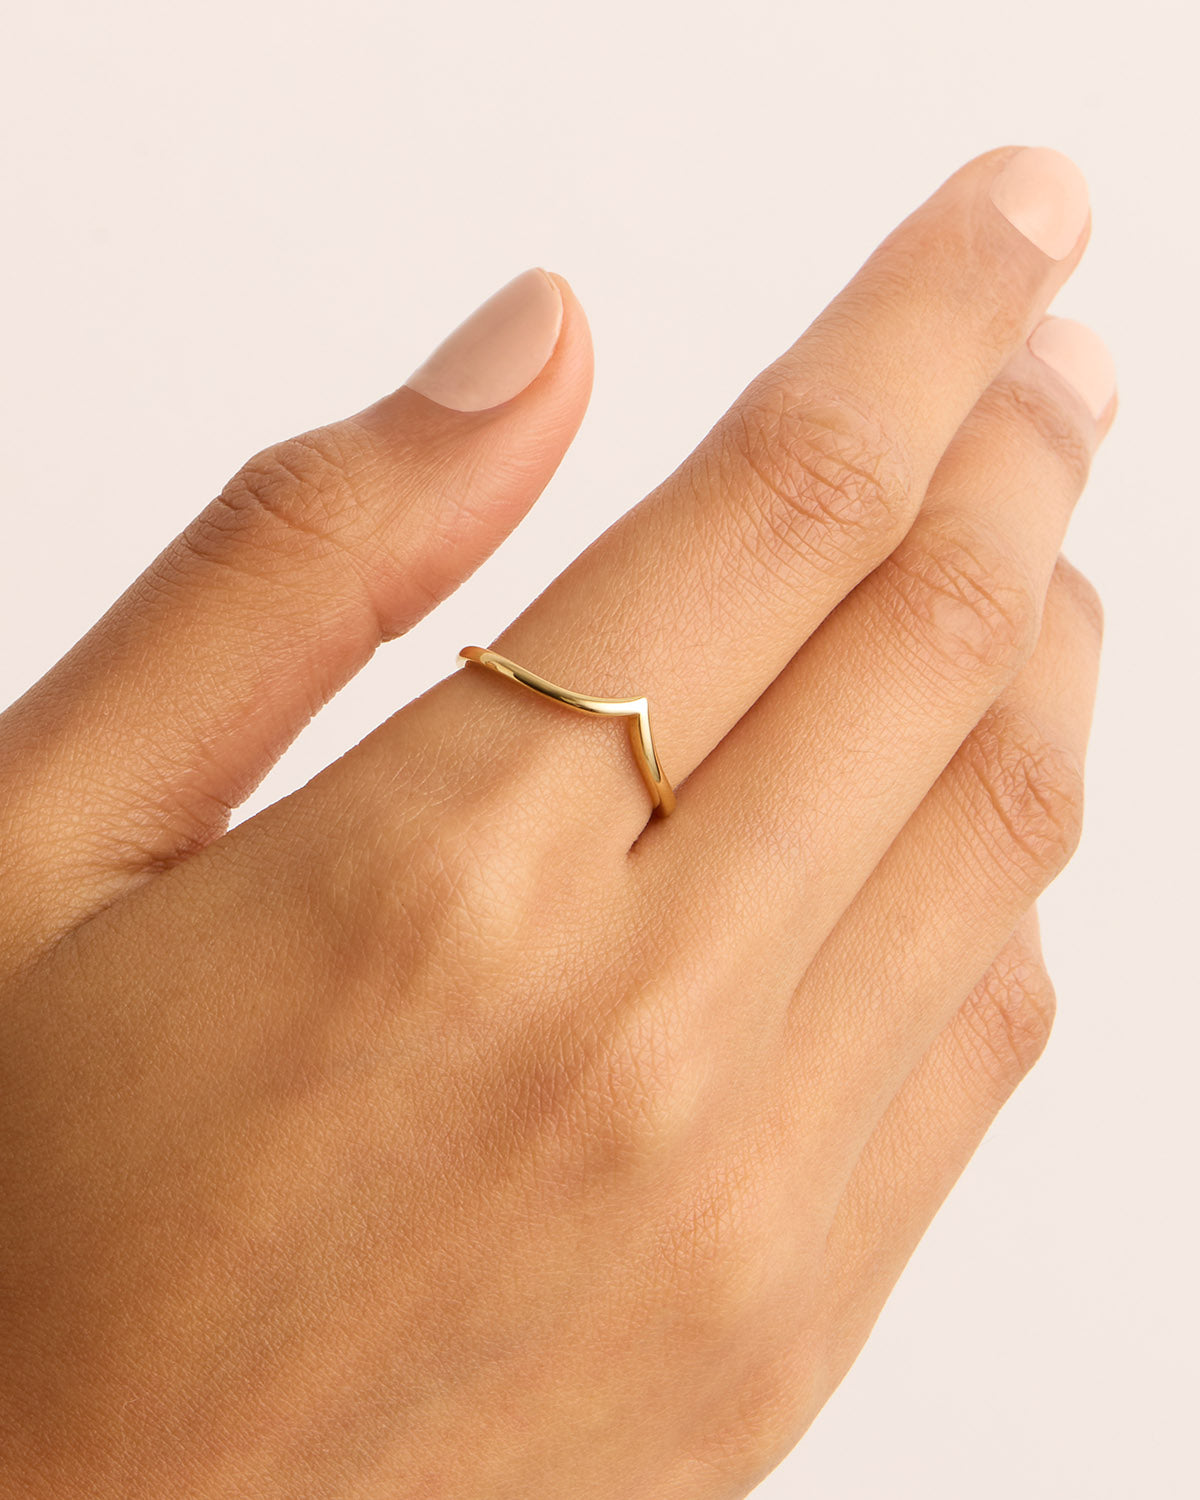 Buy 14k Yellow Gold Triangle Shape Ring, Size 9 at Amazon.in